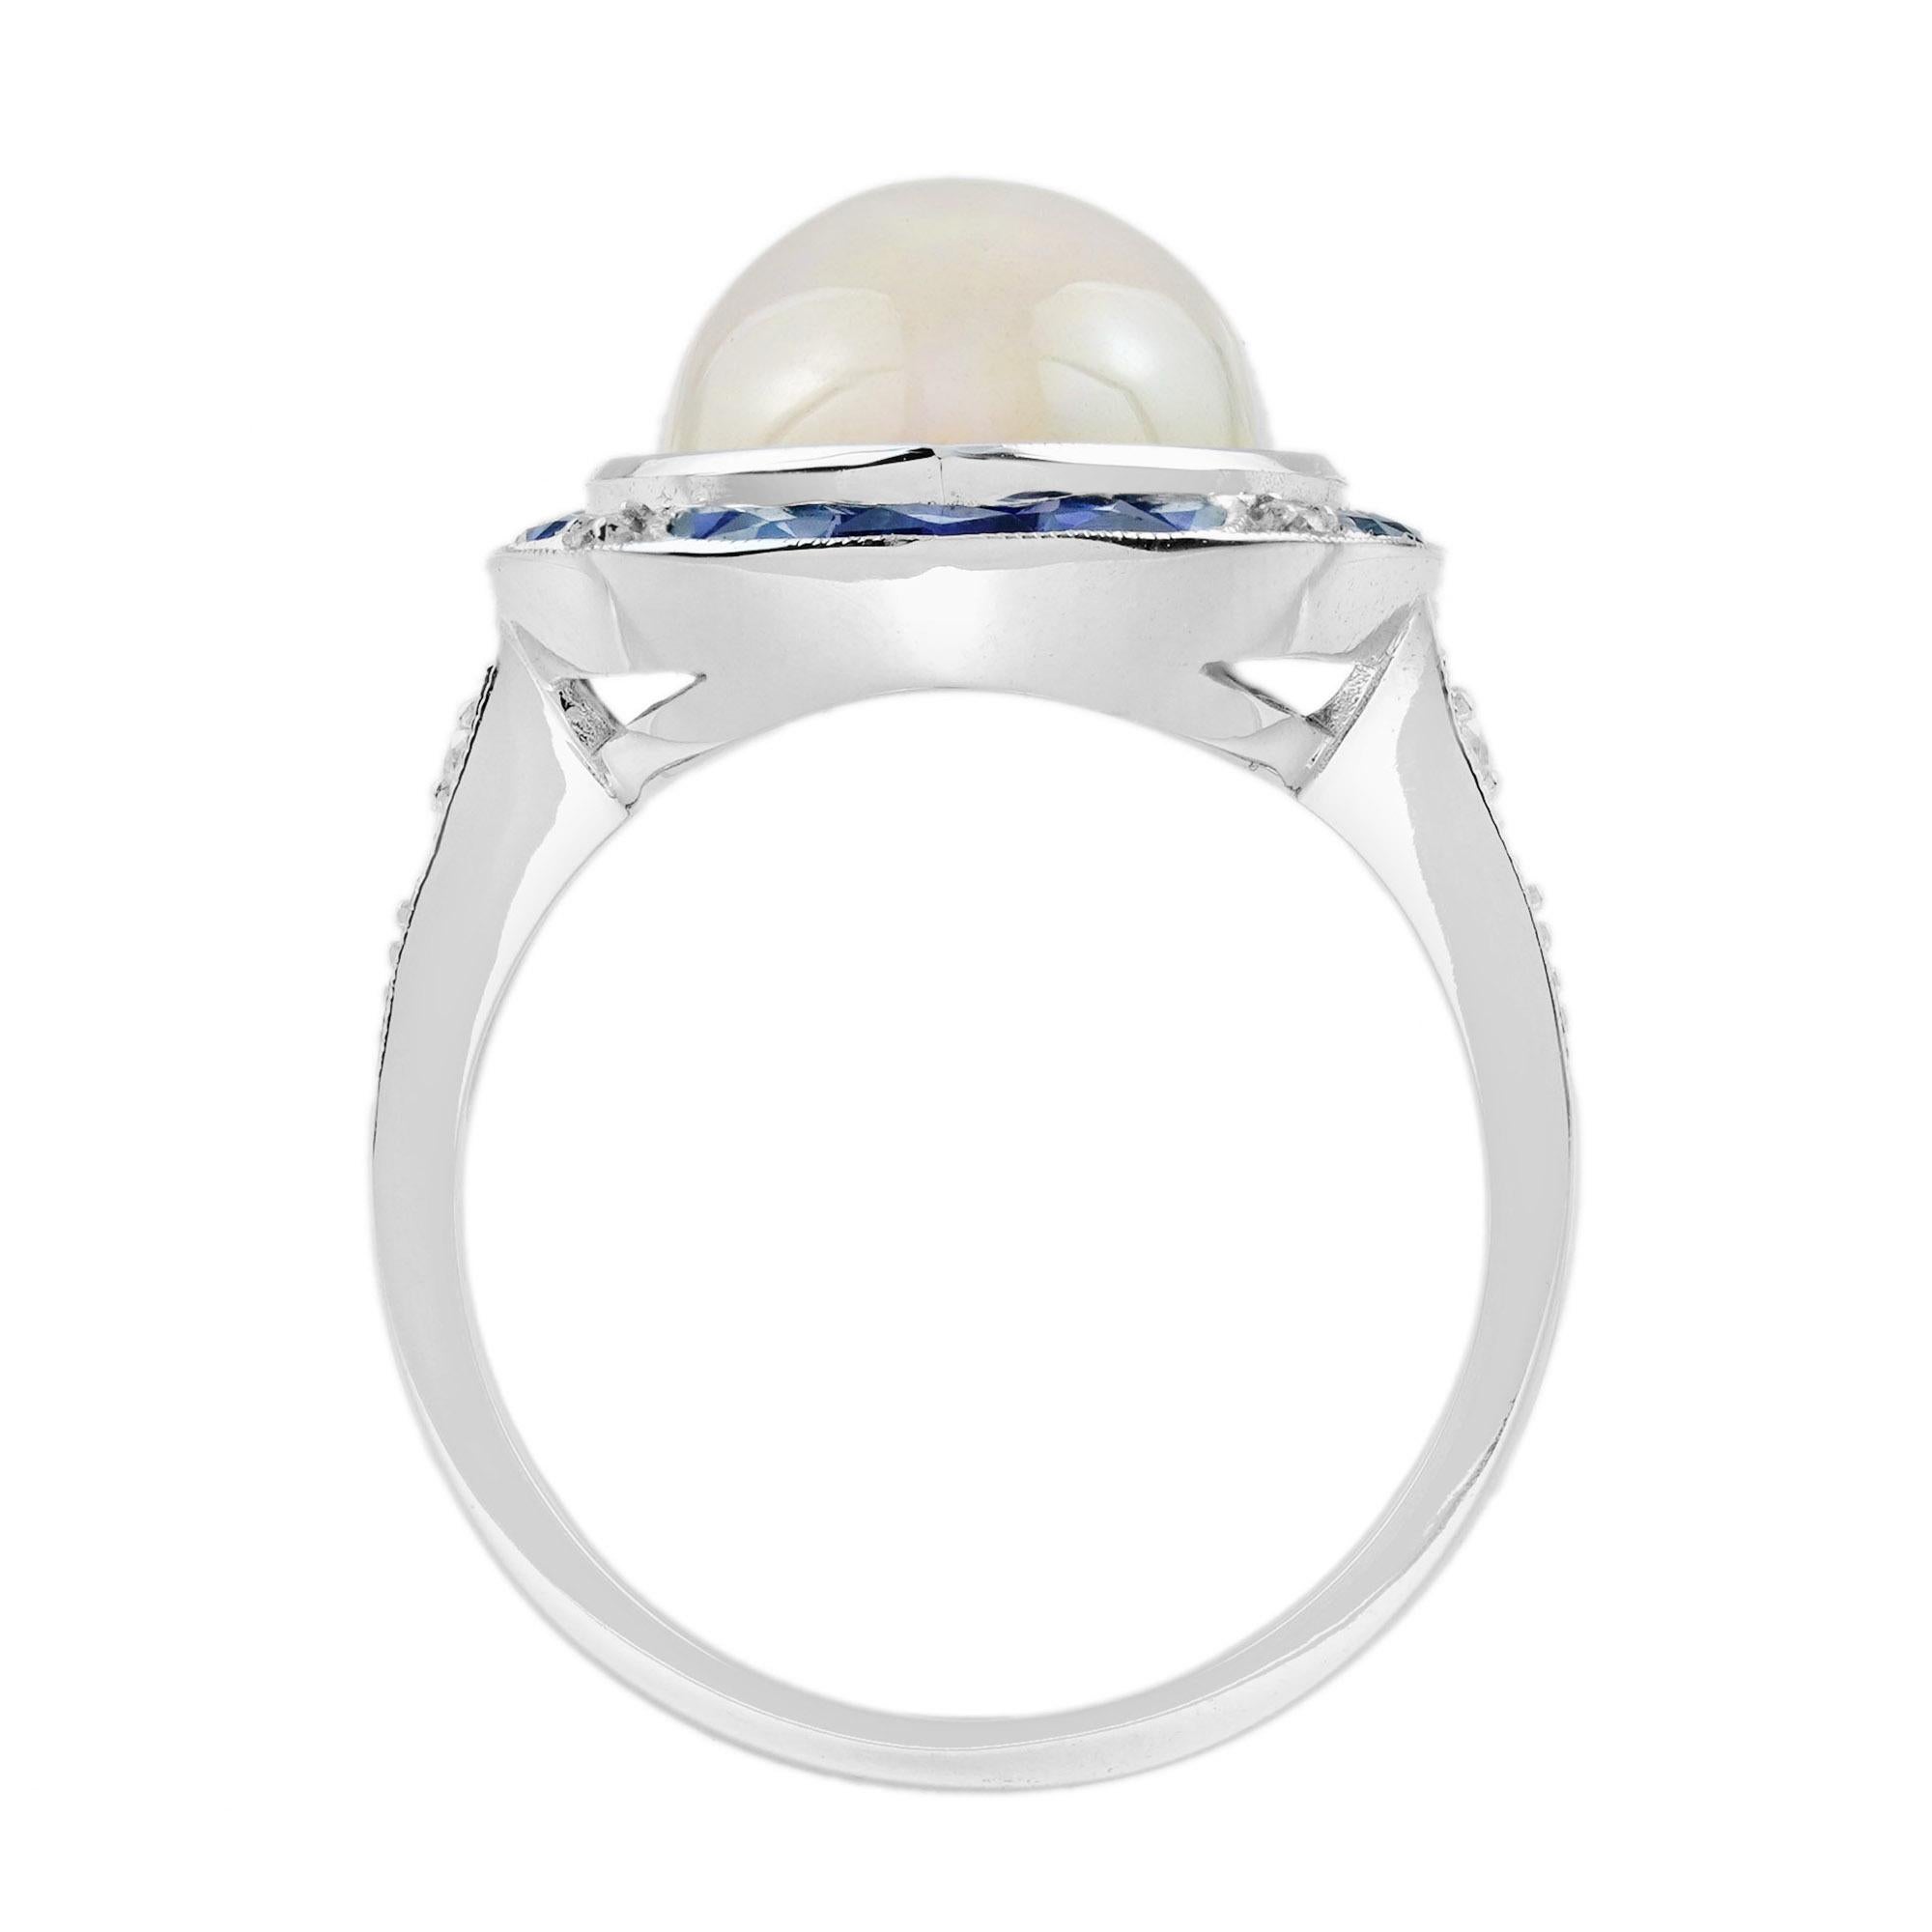 6.55 Ct. Opal Blue Sapphire Diamond Art Deco Style Cocktail Ring in 18K Gold 3